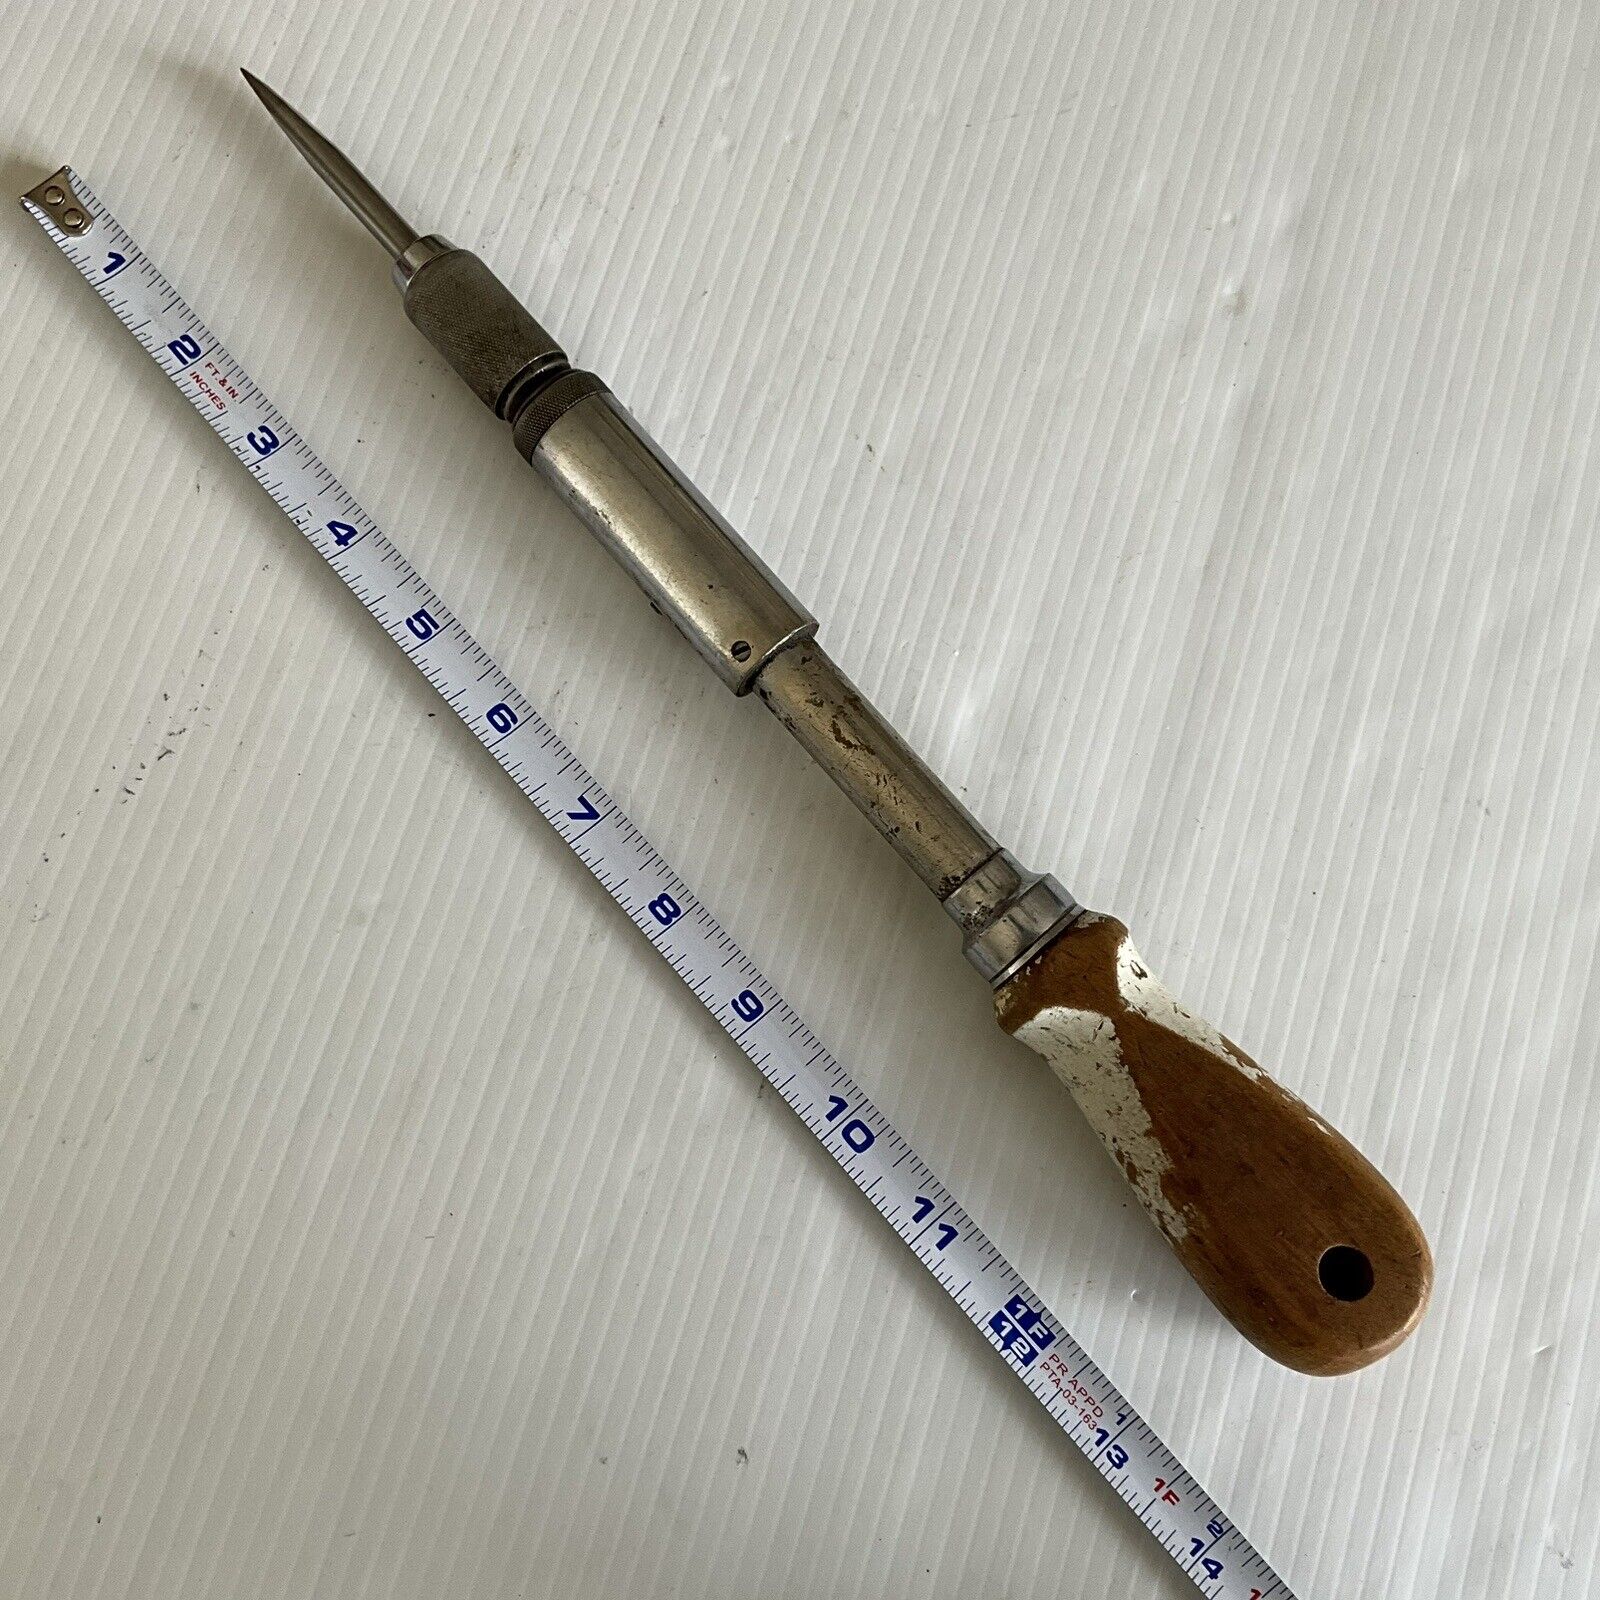 Vintage Wards Master Quality Ratchet Screwdriver With Slotted/Flathead Bit